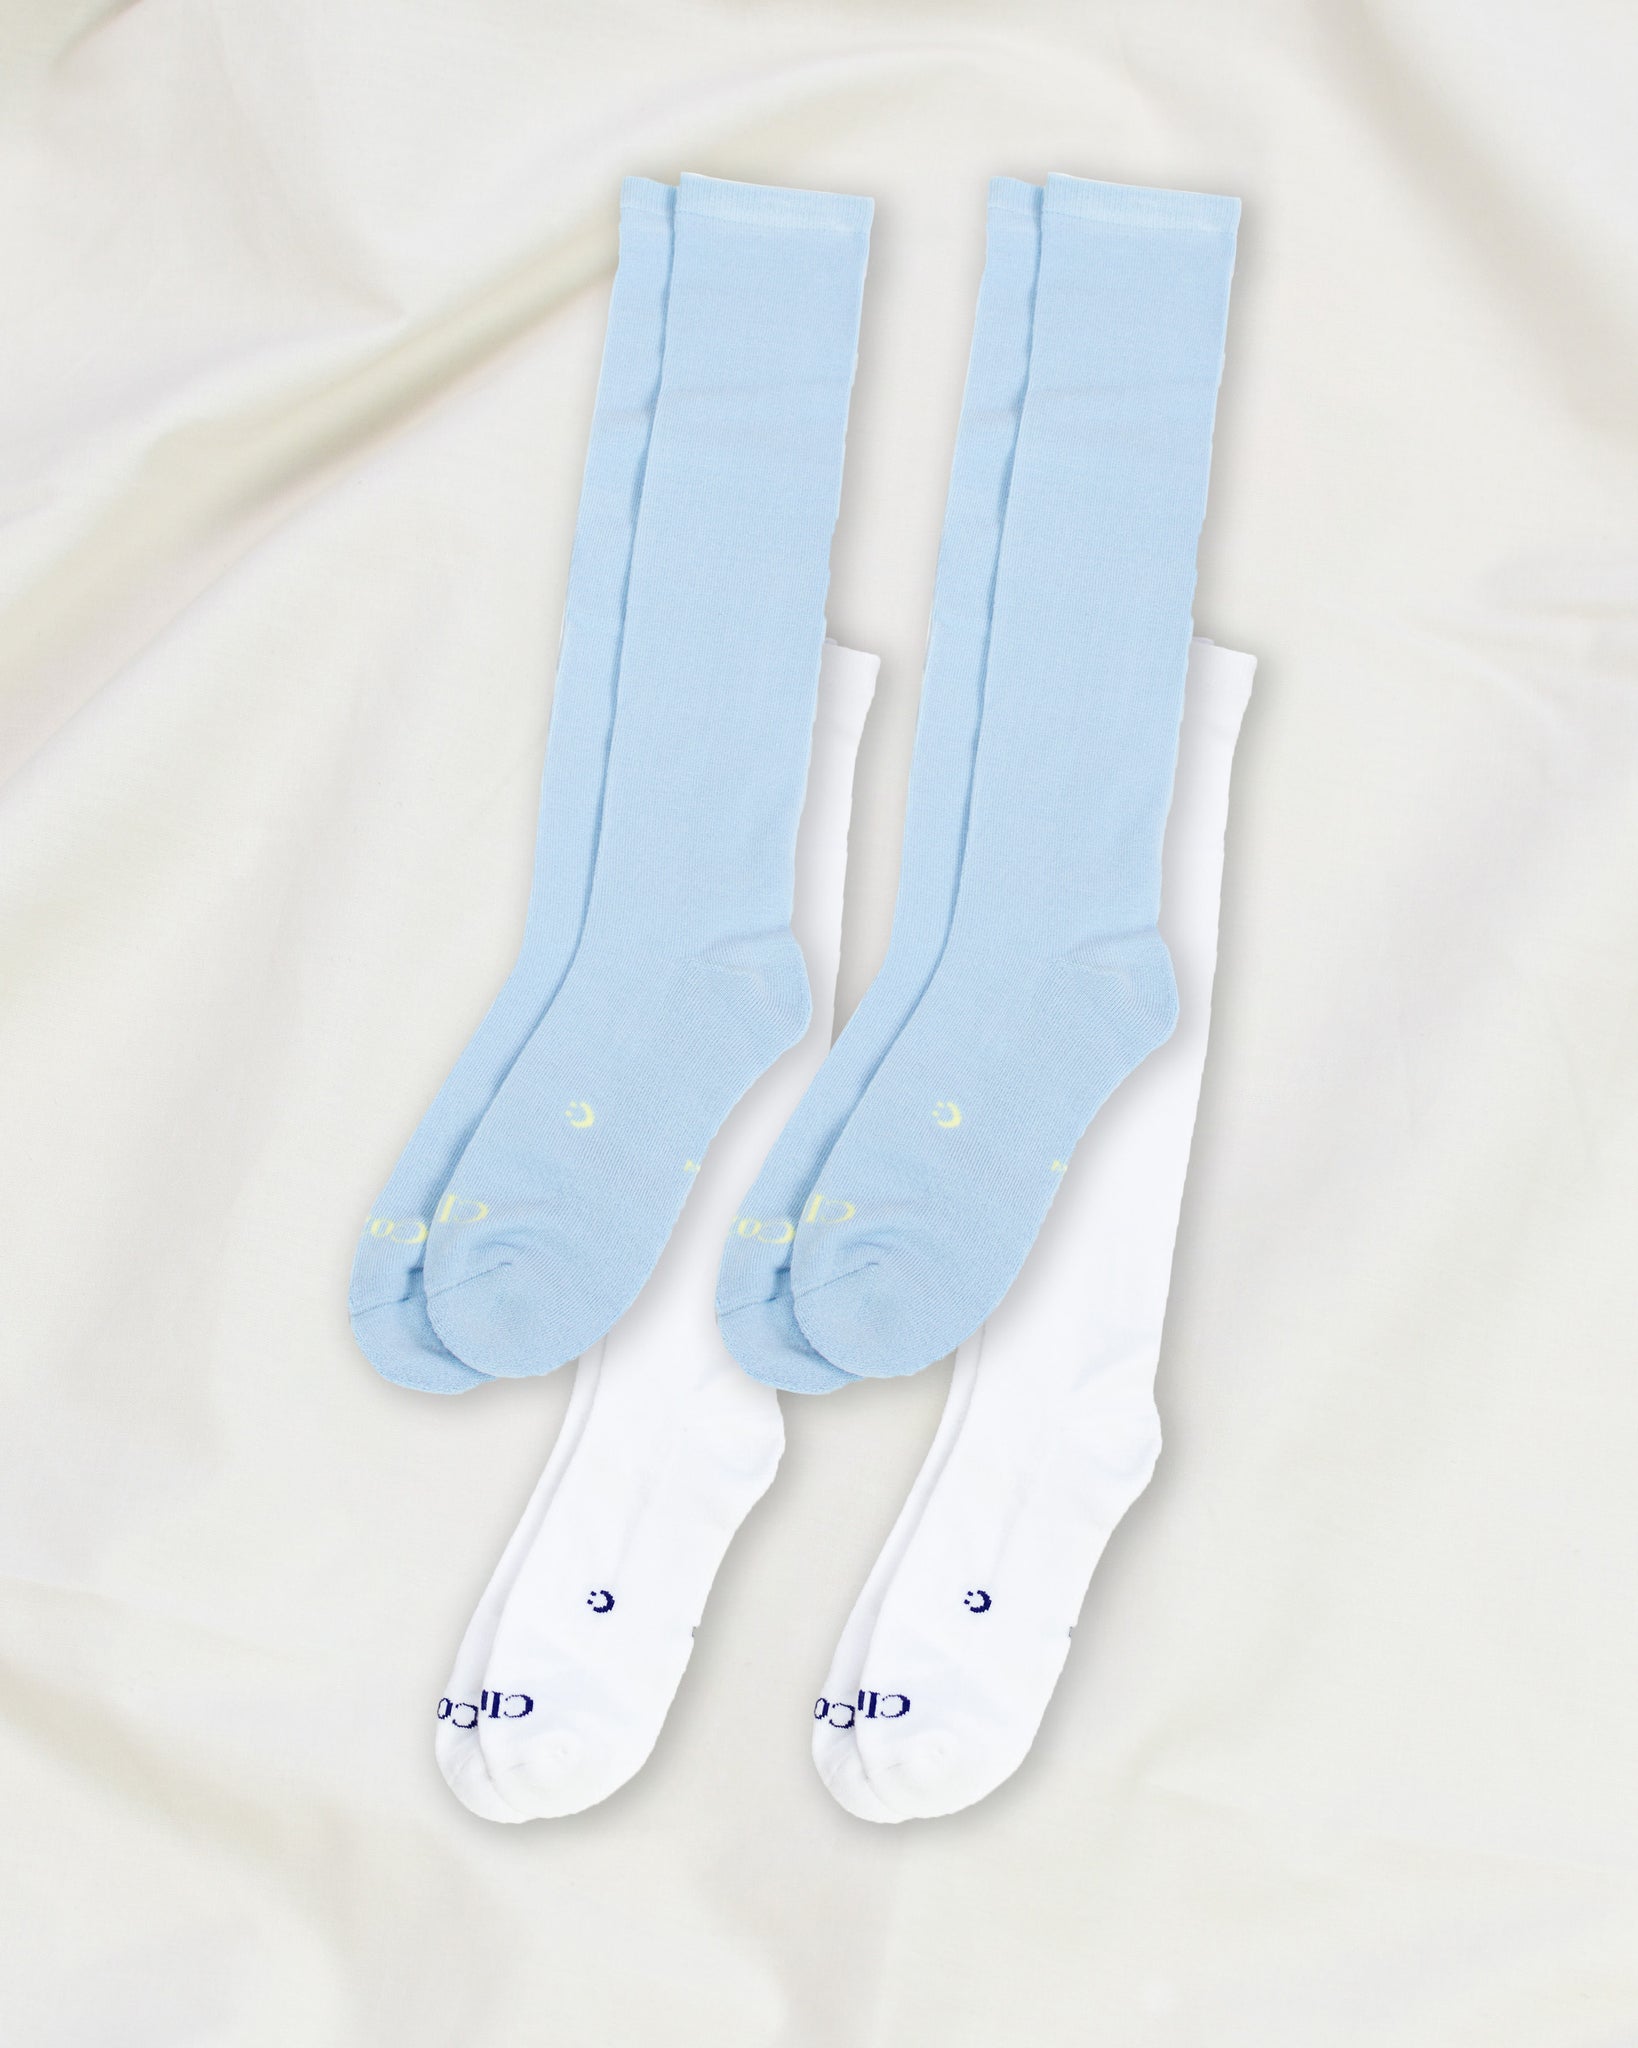 Everyday Knee-High Seamless Feel Sock 4 Pack (Adults) - Icicle